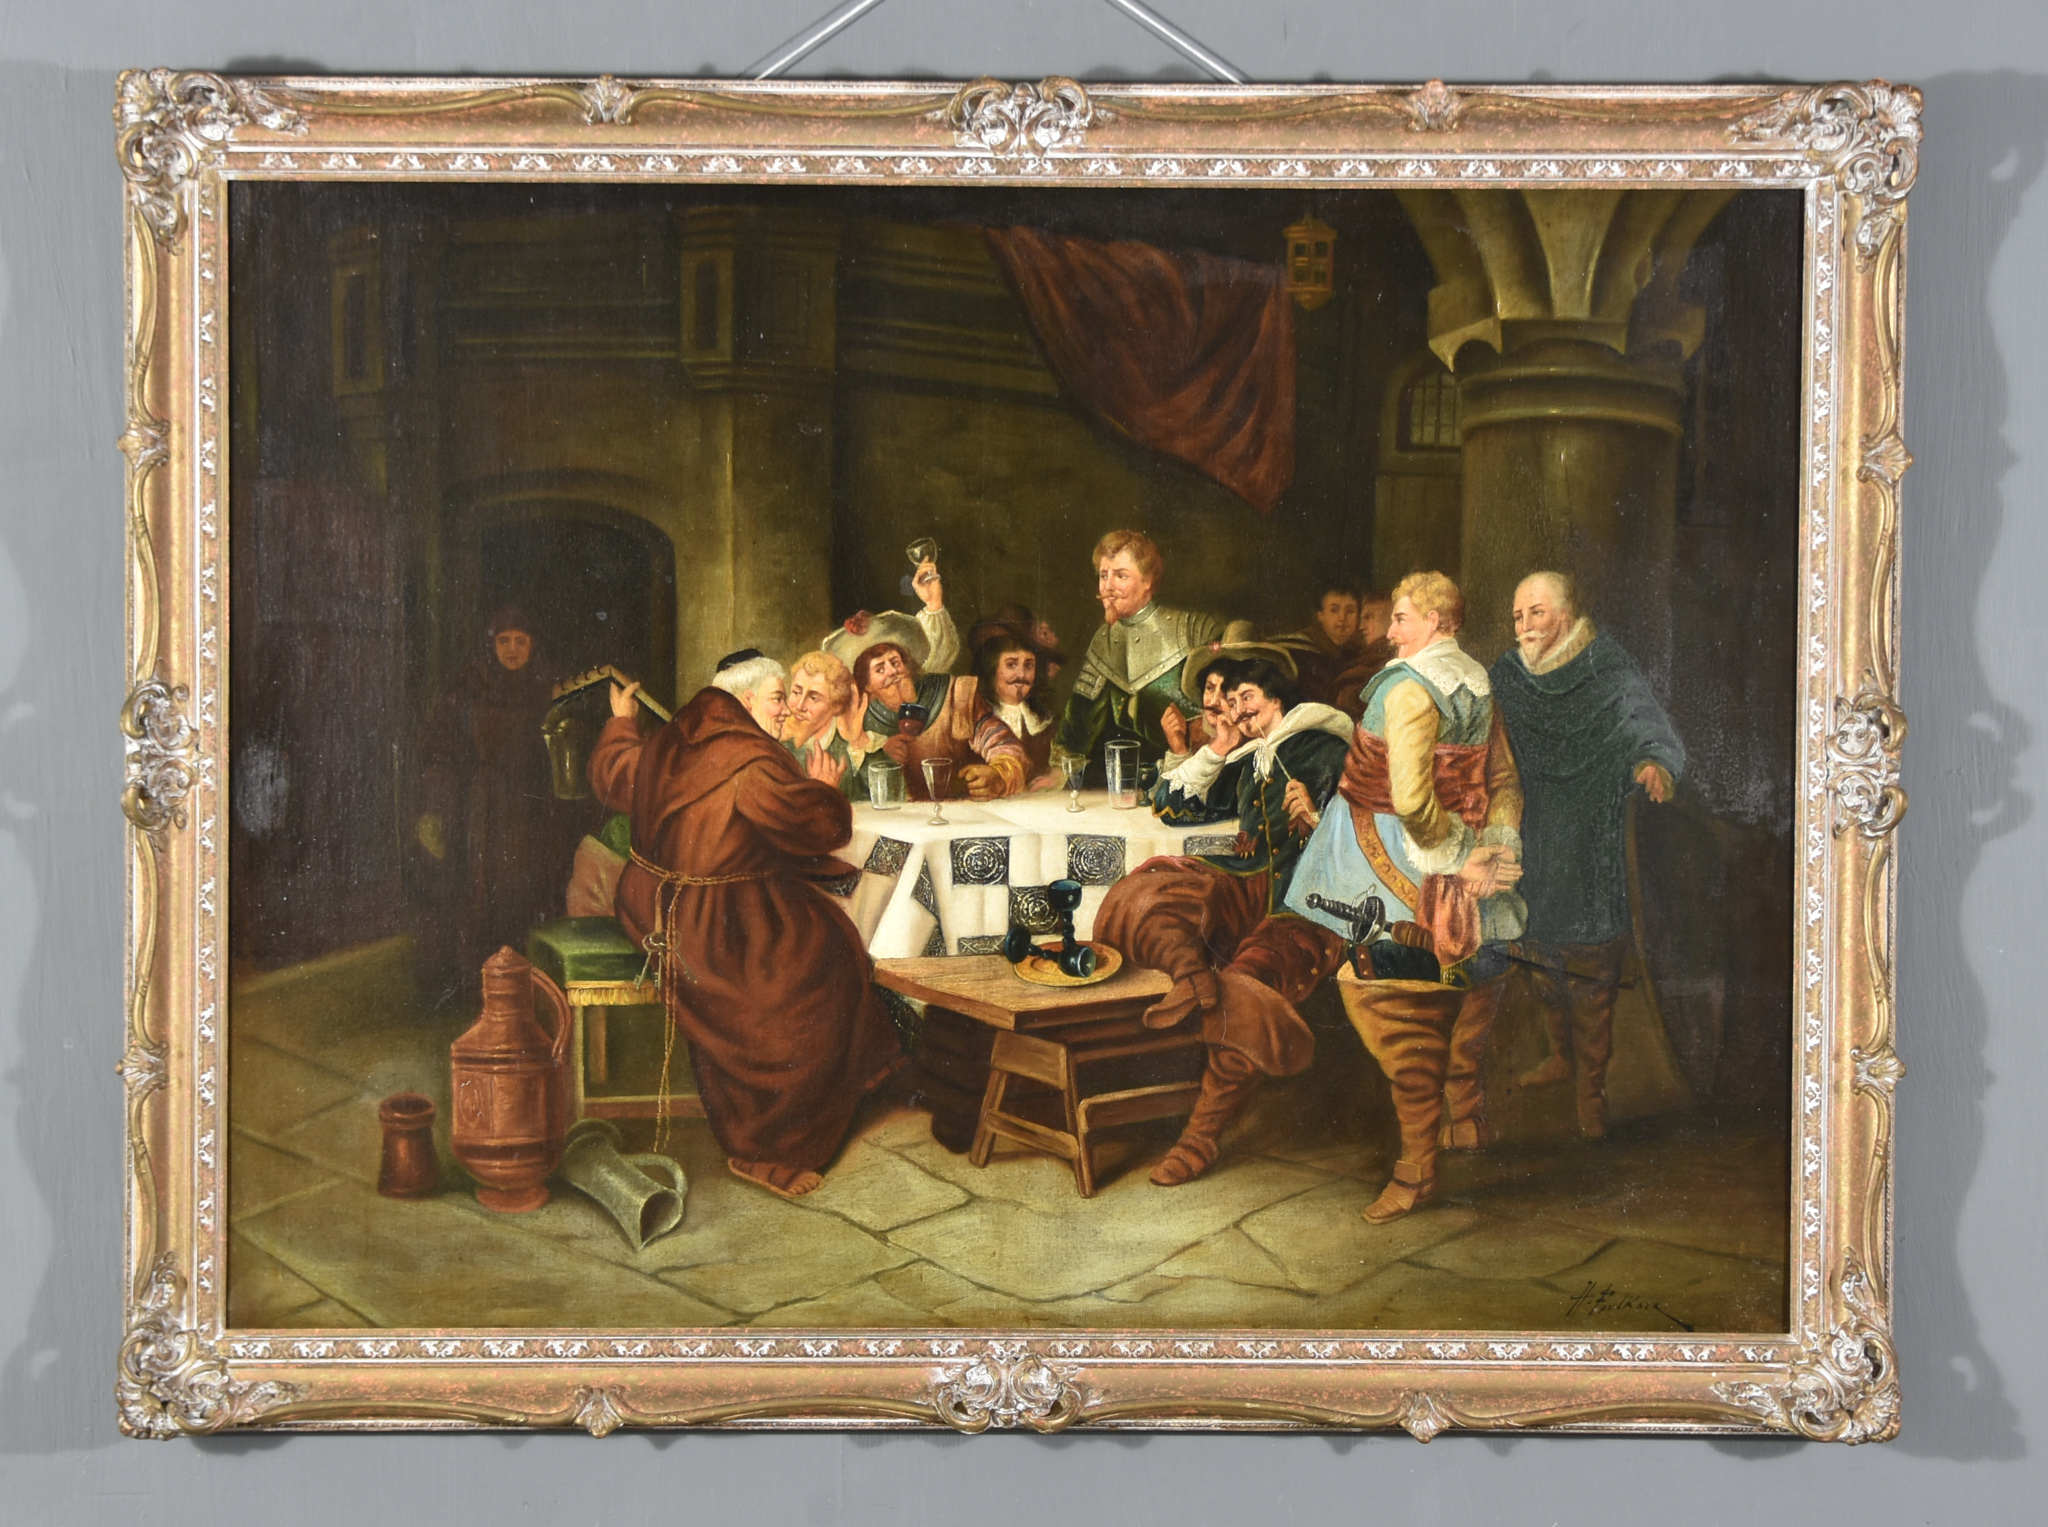 H. Faulkner (19th Century)- Oil painting - 17th Century interior scene with monk and cavaliers - Image 4 of 4